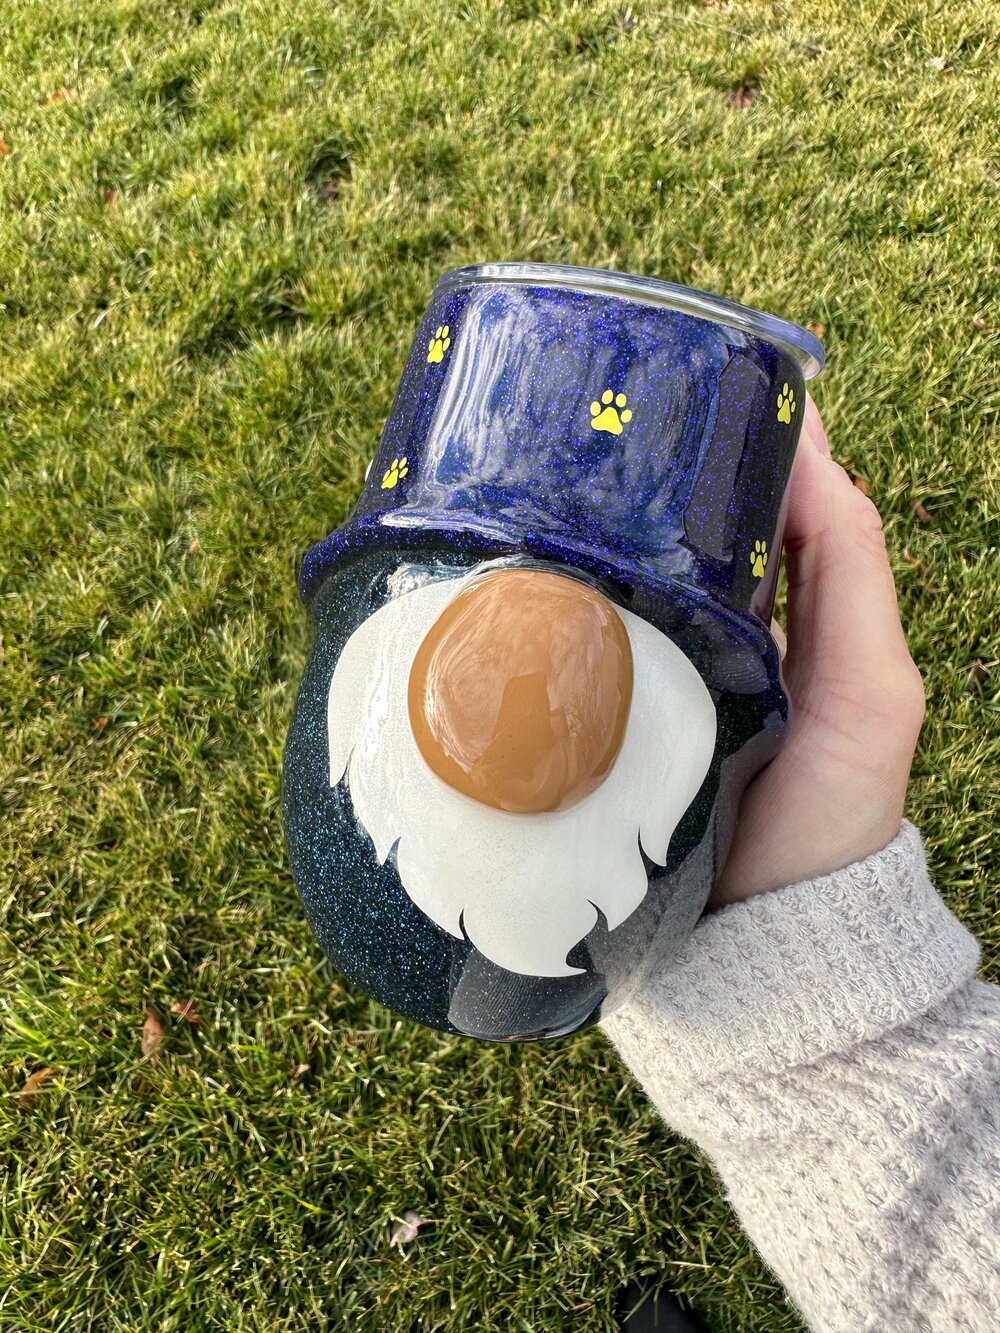 Fuzzy Gnome Easter Tumbler (T173) – Swiit Creations